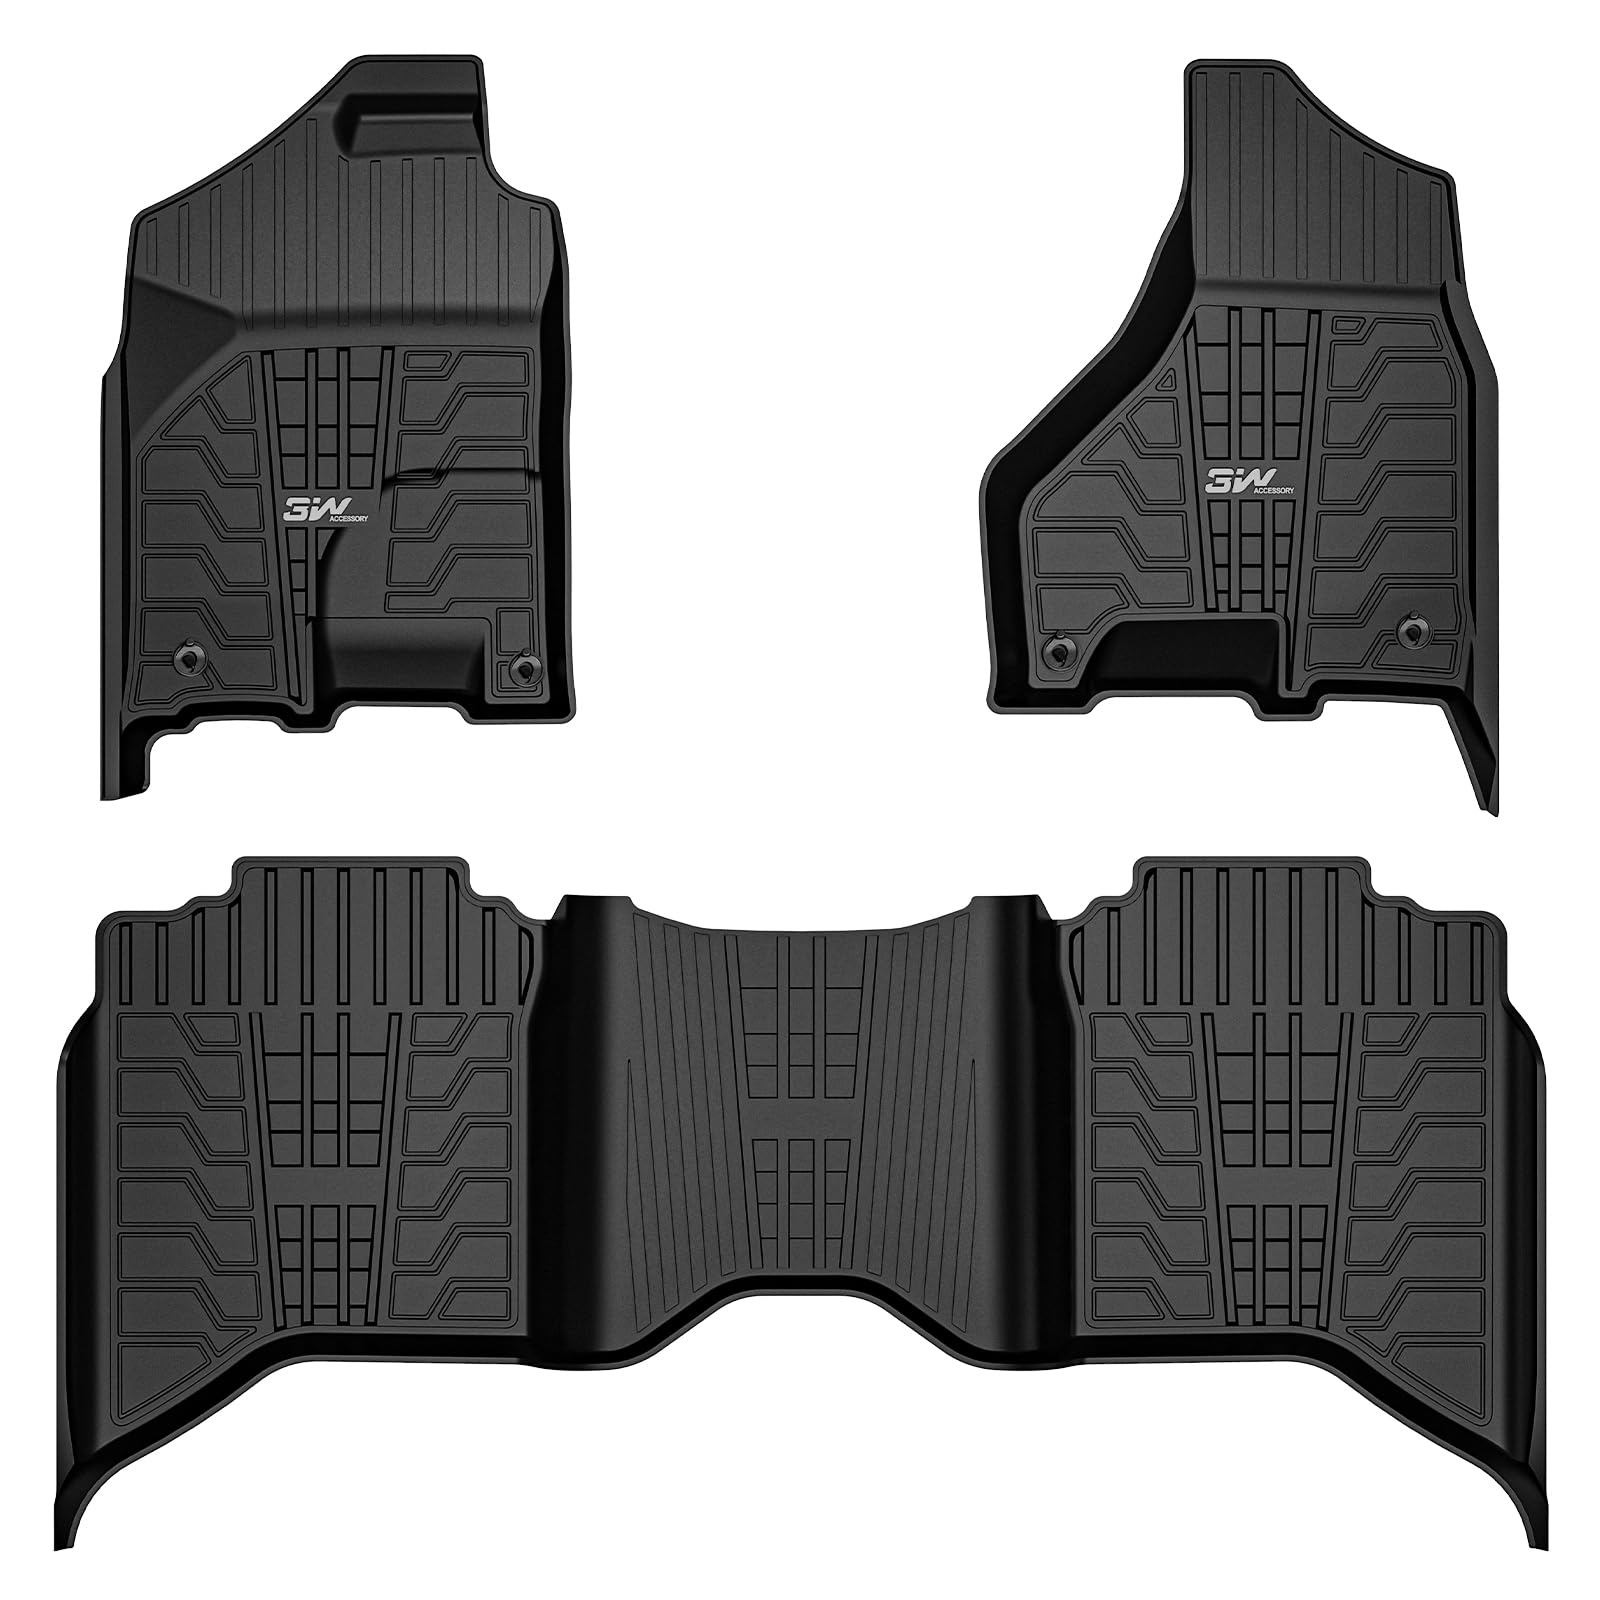 3W Dodge Ram 1500/2500/3500 2013-2018 (Not Quad cab) Without Storage Custom Floor Mats TPE Material & All-Weather Protection Vehicles & Parts 3Wliners 2013-2018 Ram 1500 2013-2018 1st&2nd Row Mats